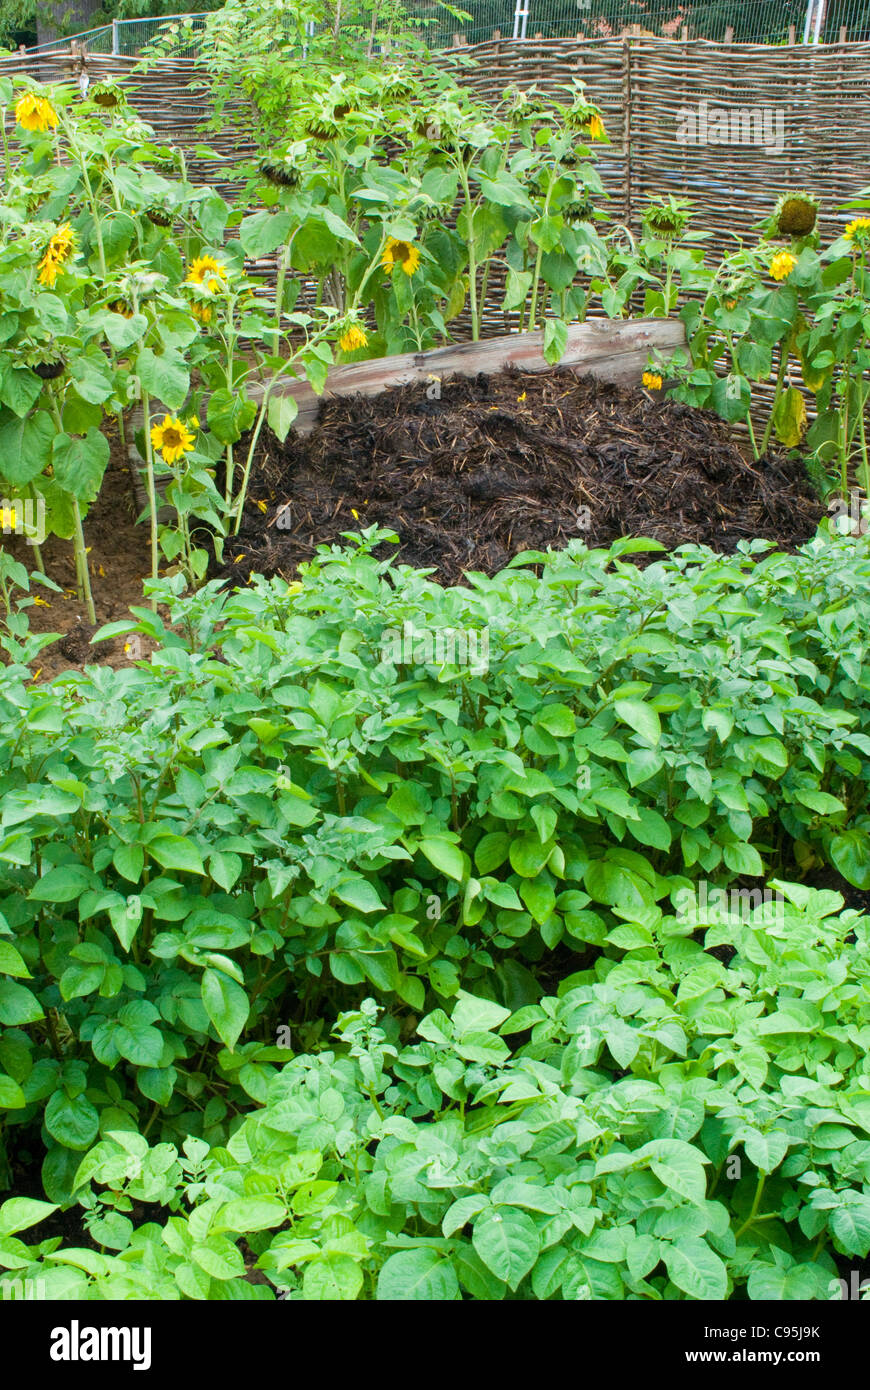 Composted Manure pile + potato plants vegetables and sunflowers to replenish soil nutrients organic gardening pretty flowers Stock Photo